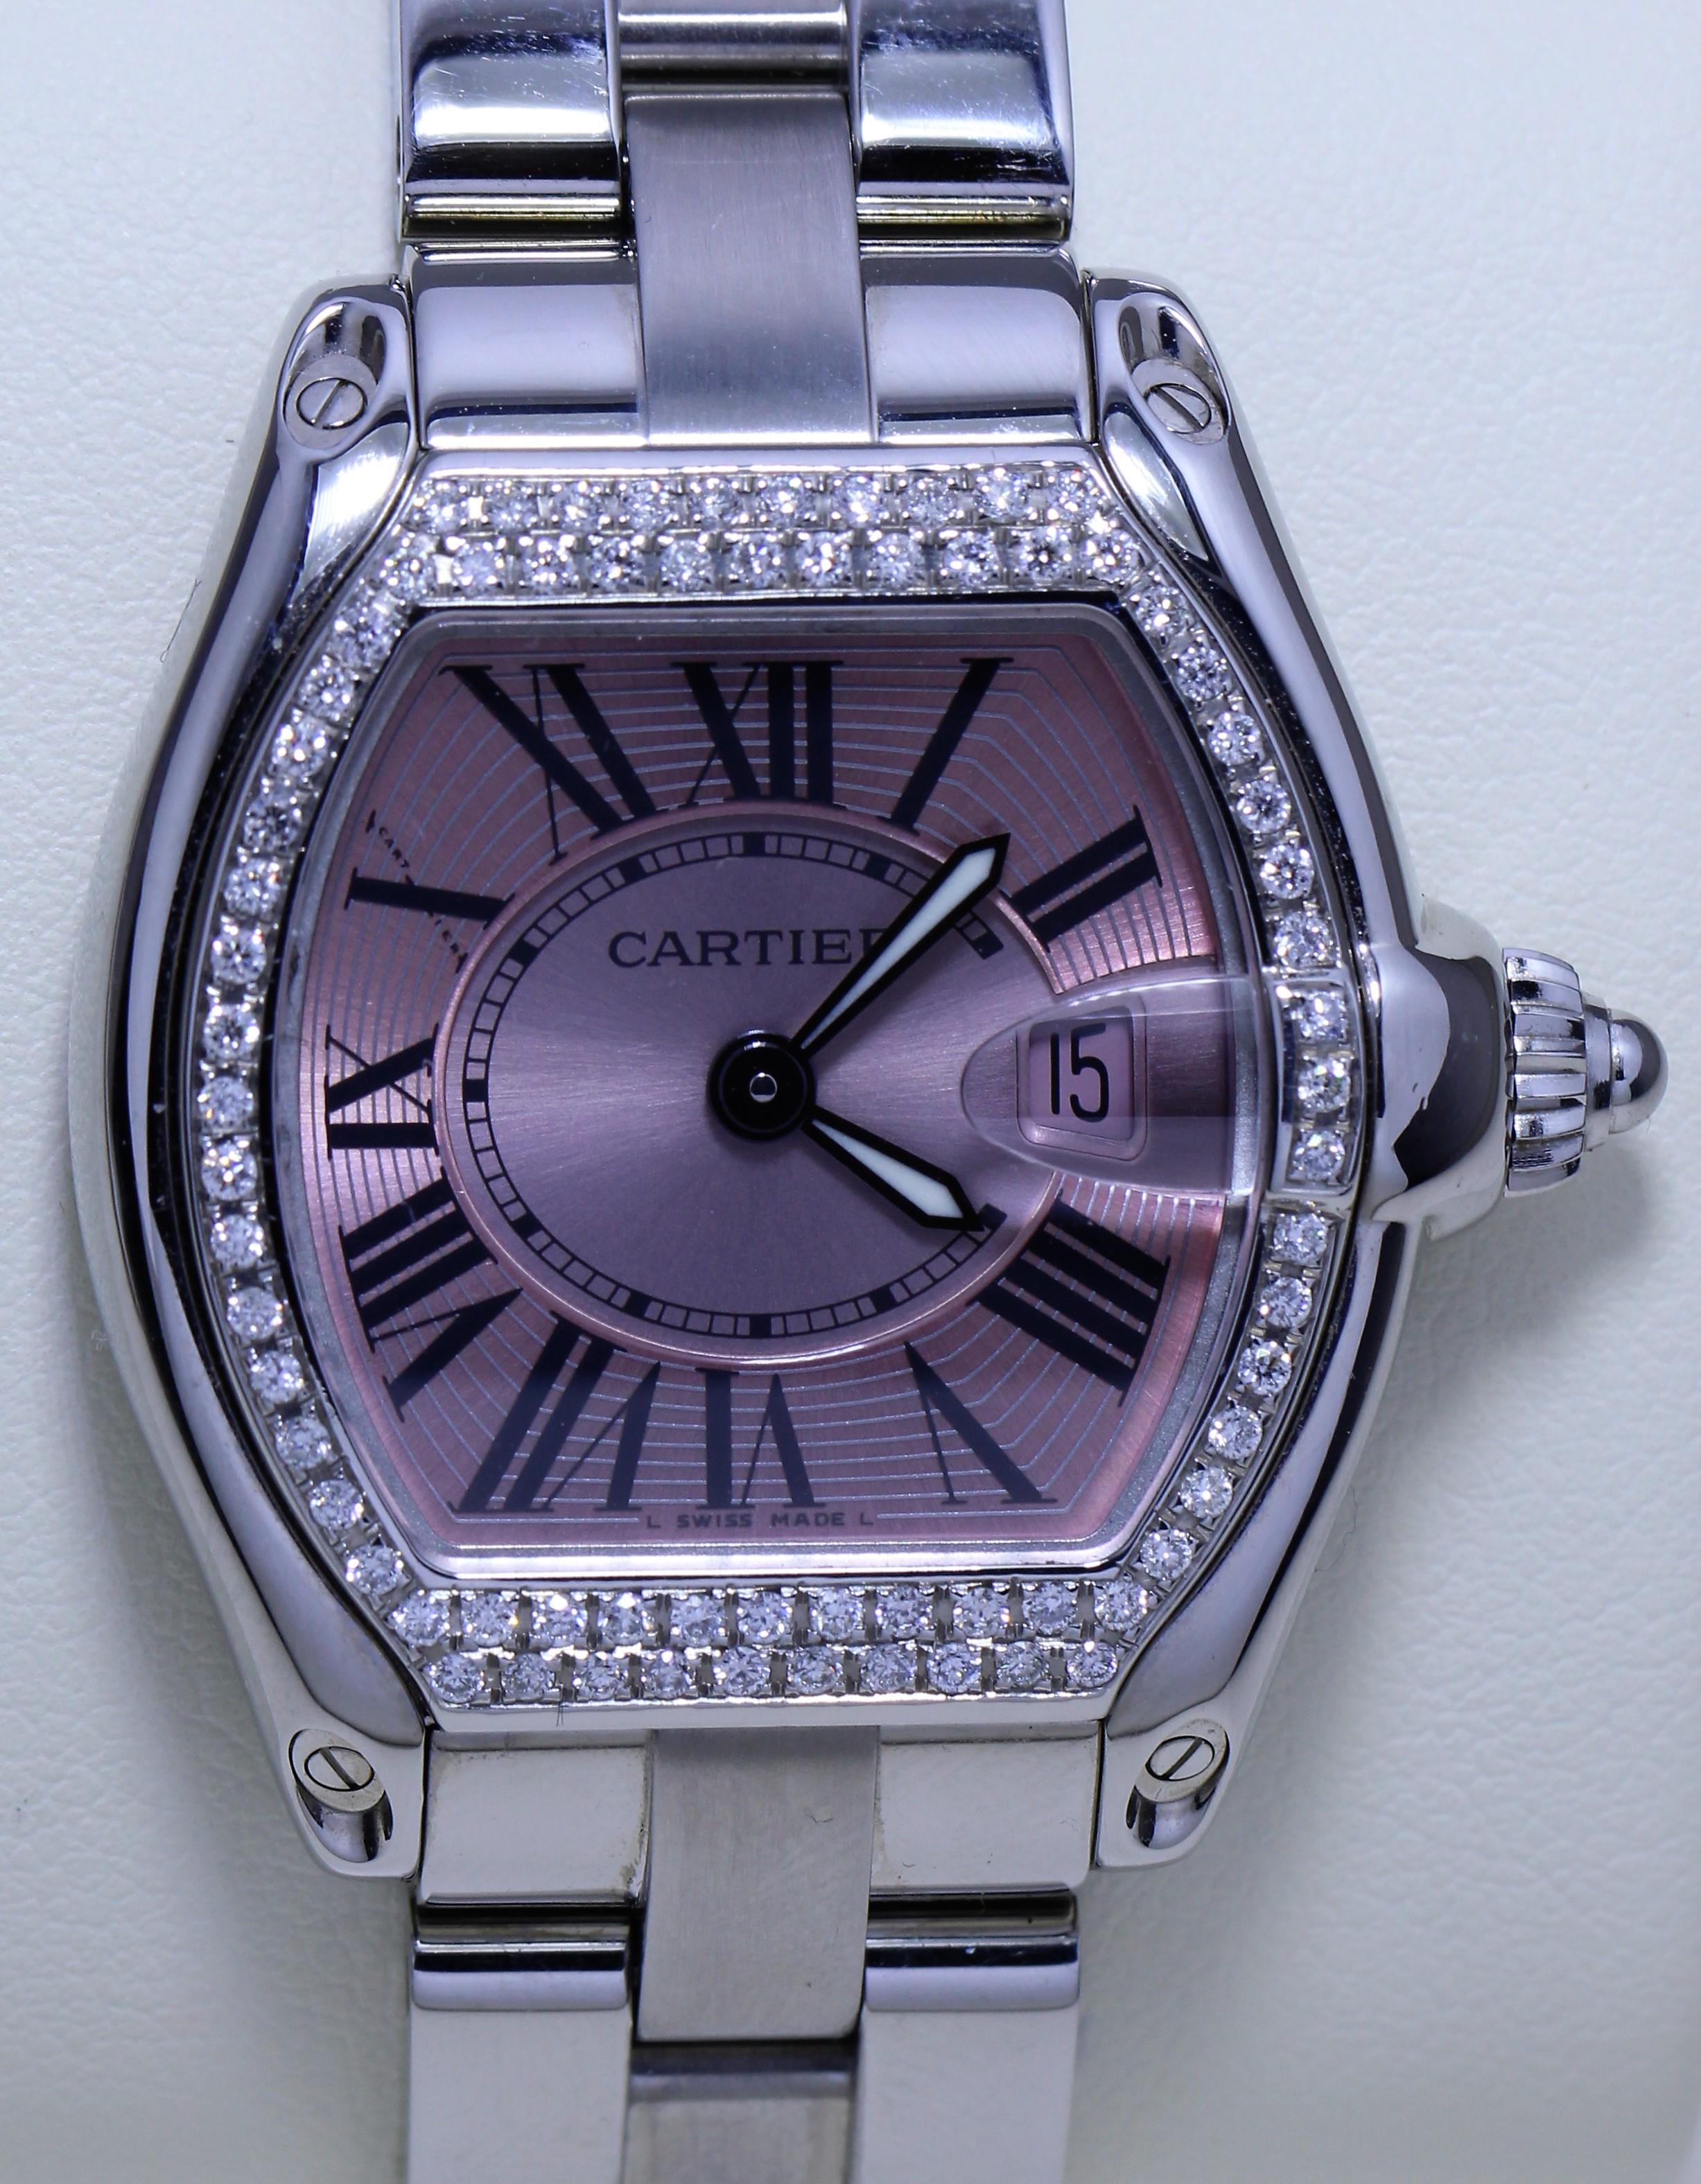 Cartier Diamond Studded Wristwatch
Pink face with date display
Roman numeral hour markers
Diamond studded bezel

